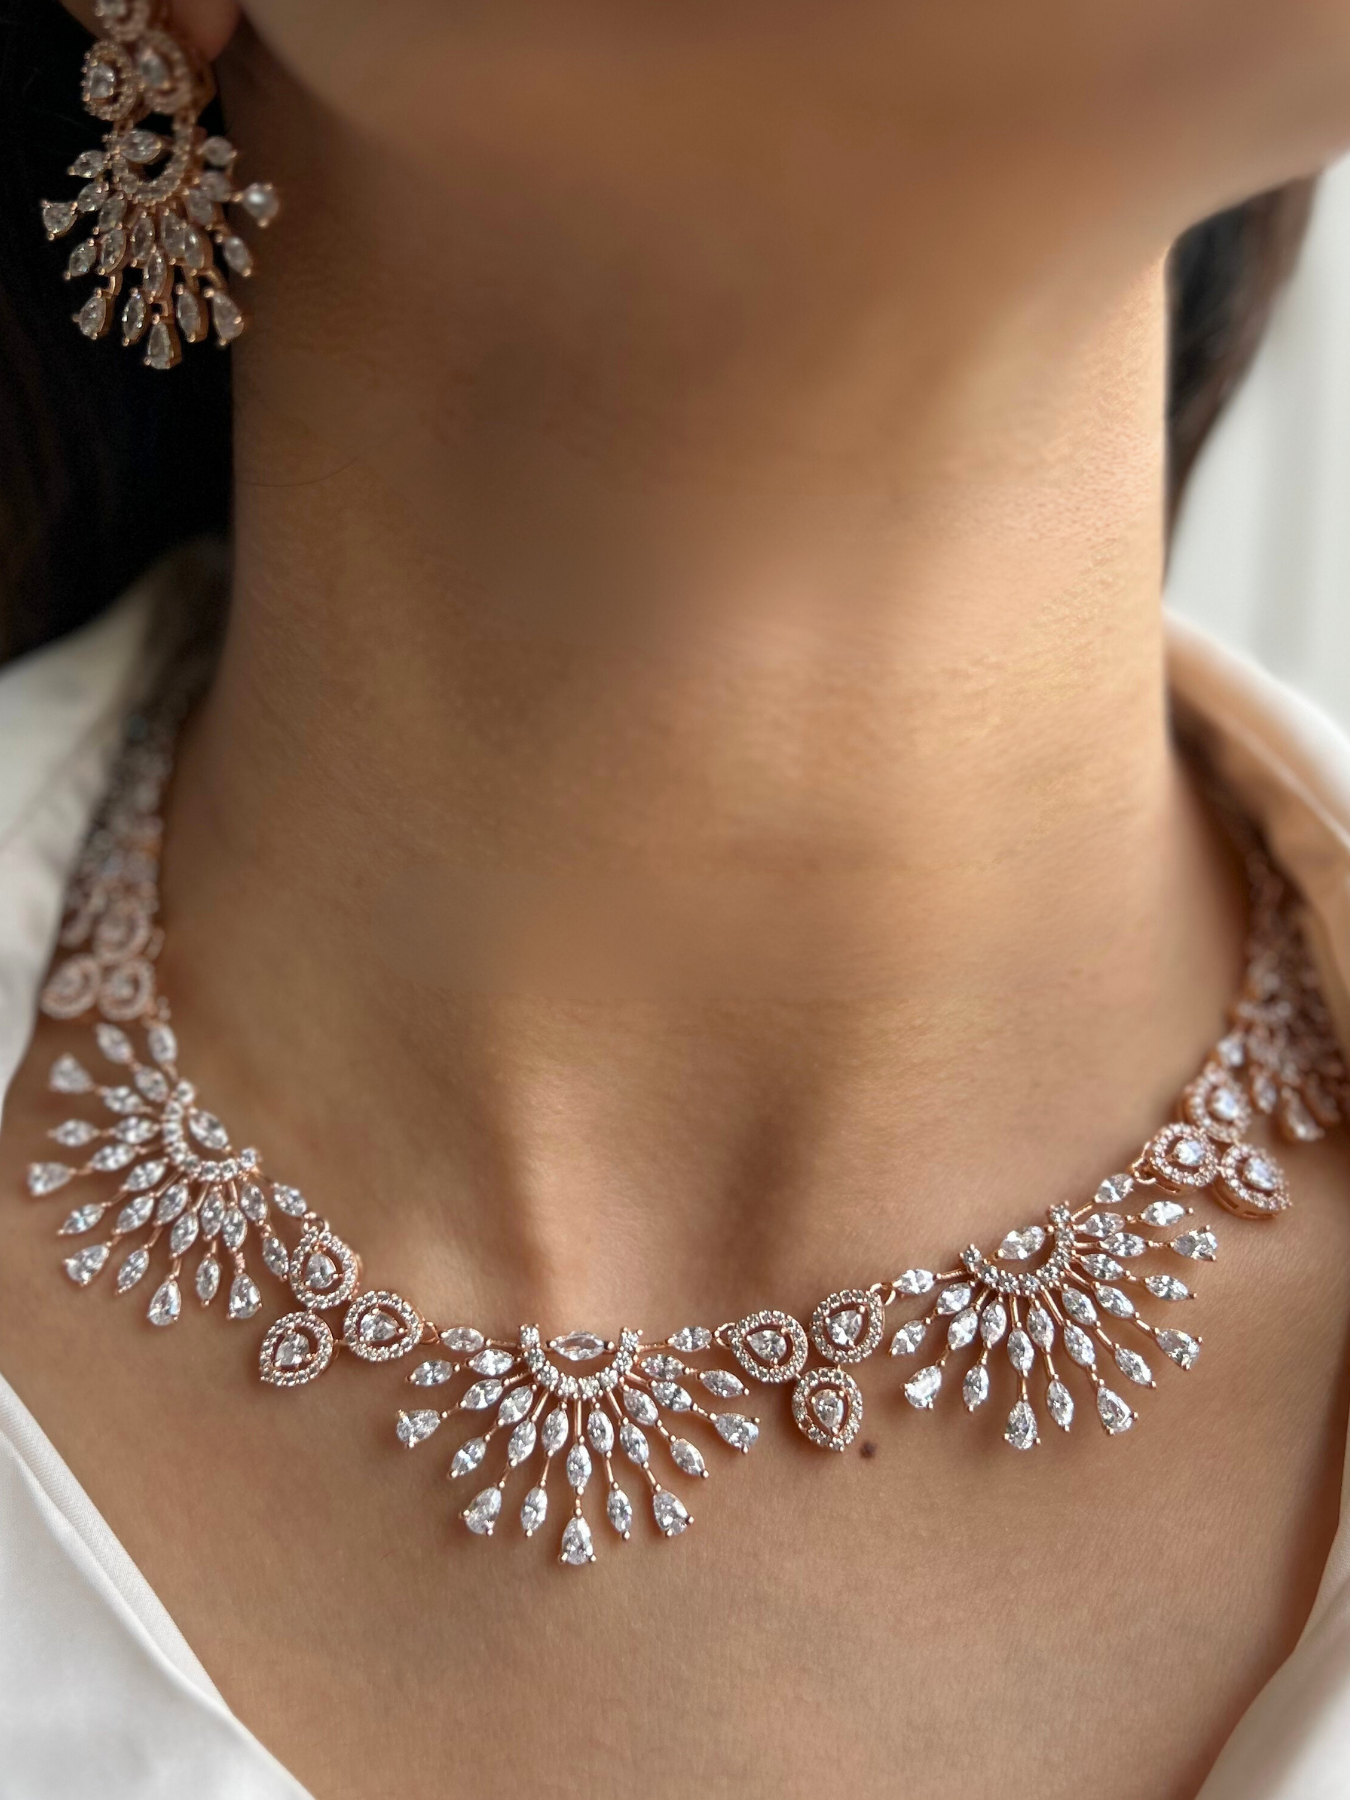 Bridal Necklace Designs For Brides For Their Wedding Day | Bridal necklace  designs, Wedding jewelry sets bridal jewellery, Bridal jewelry sets brides